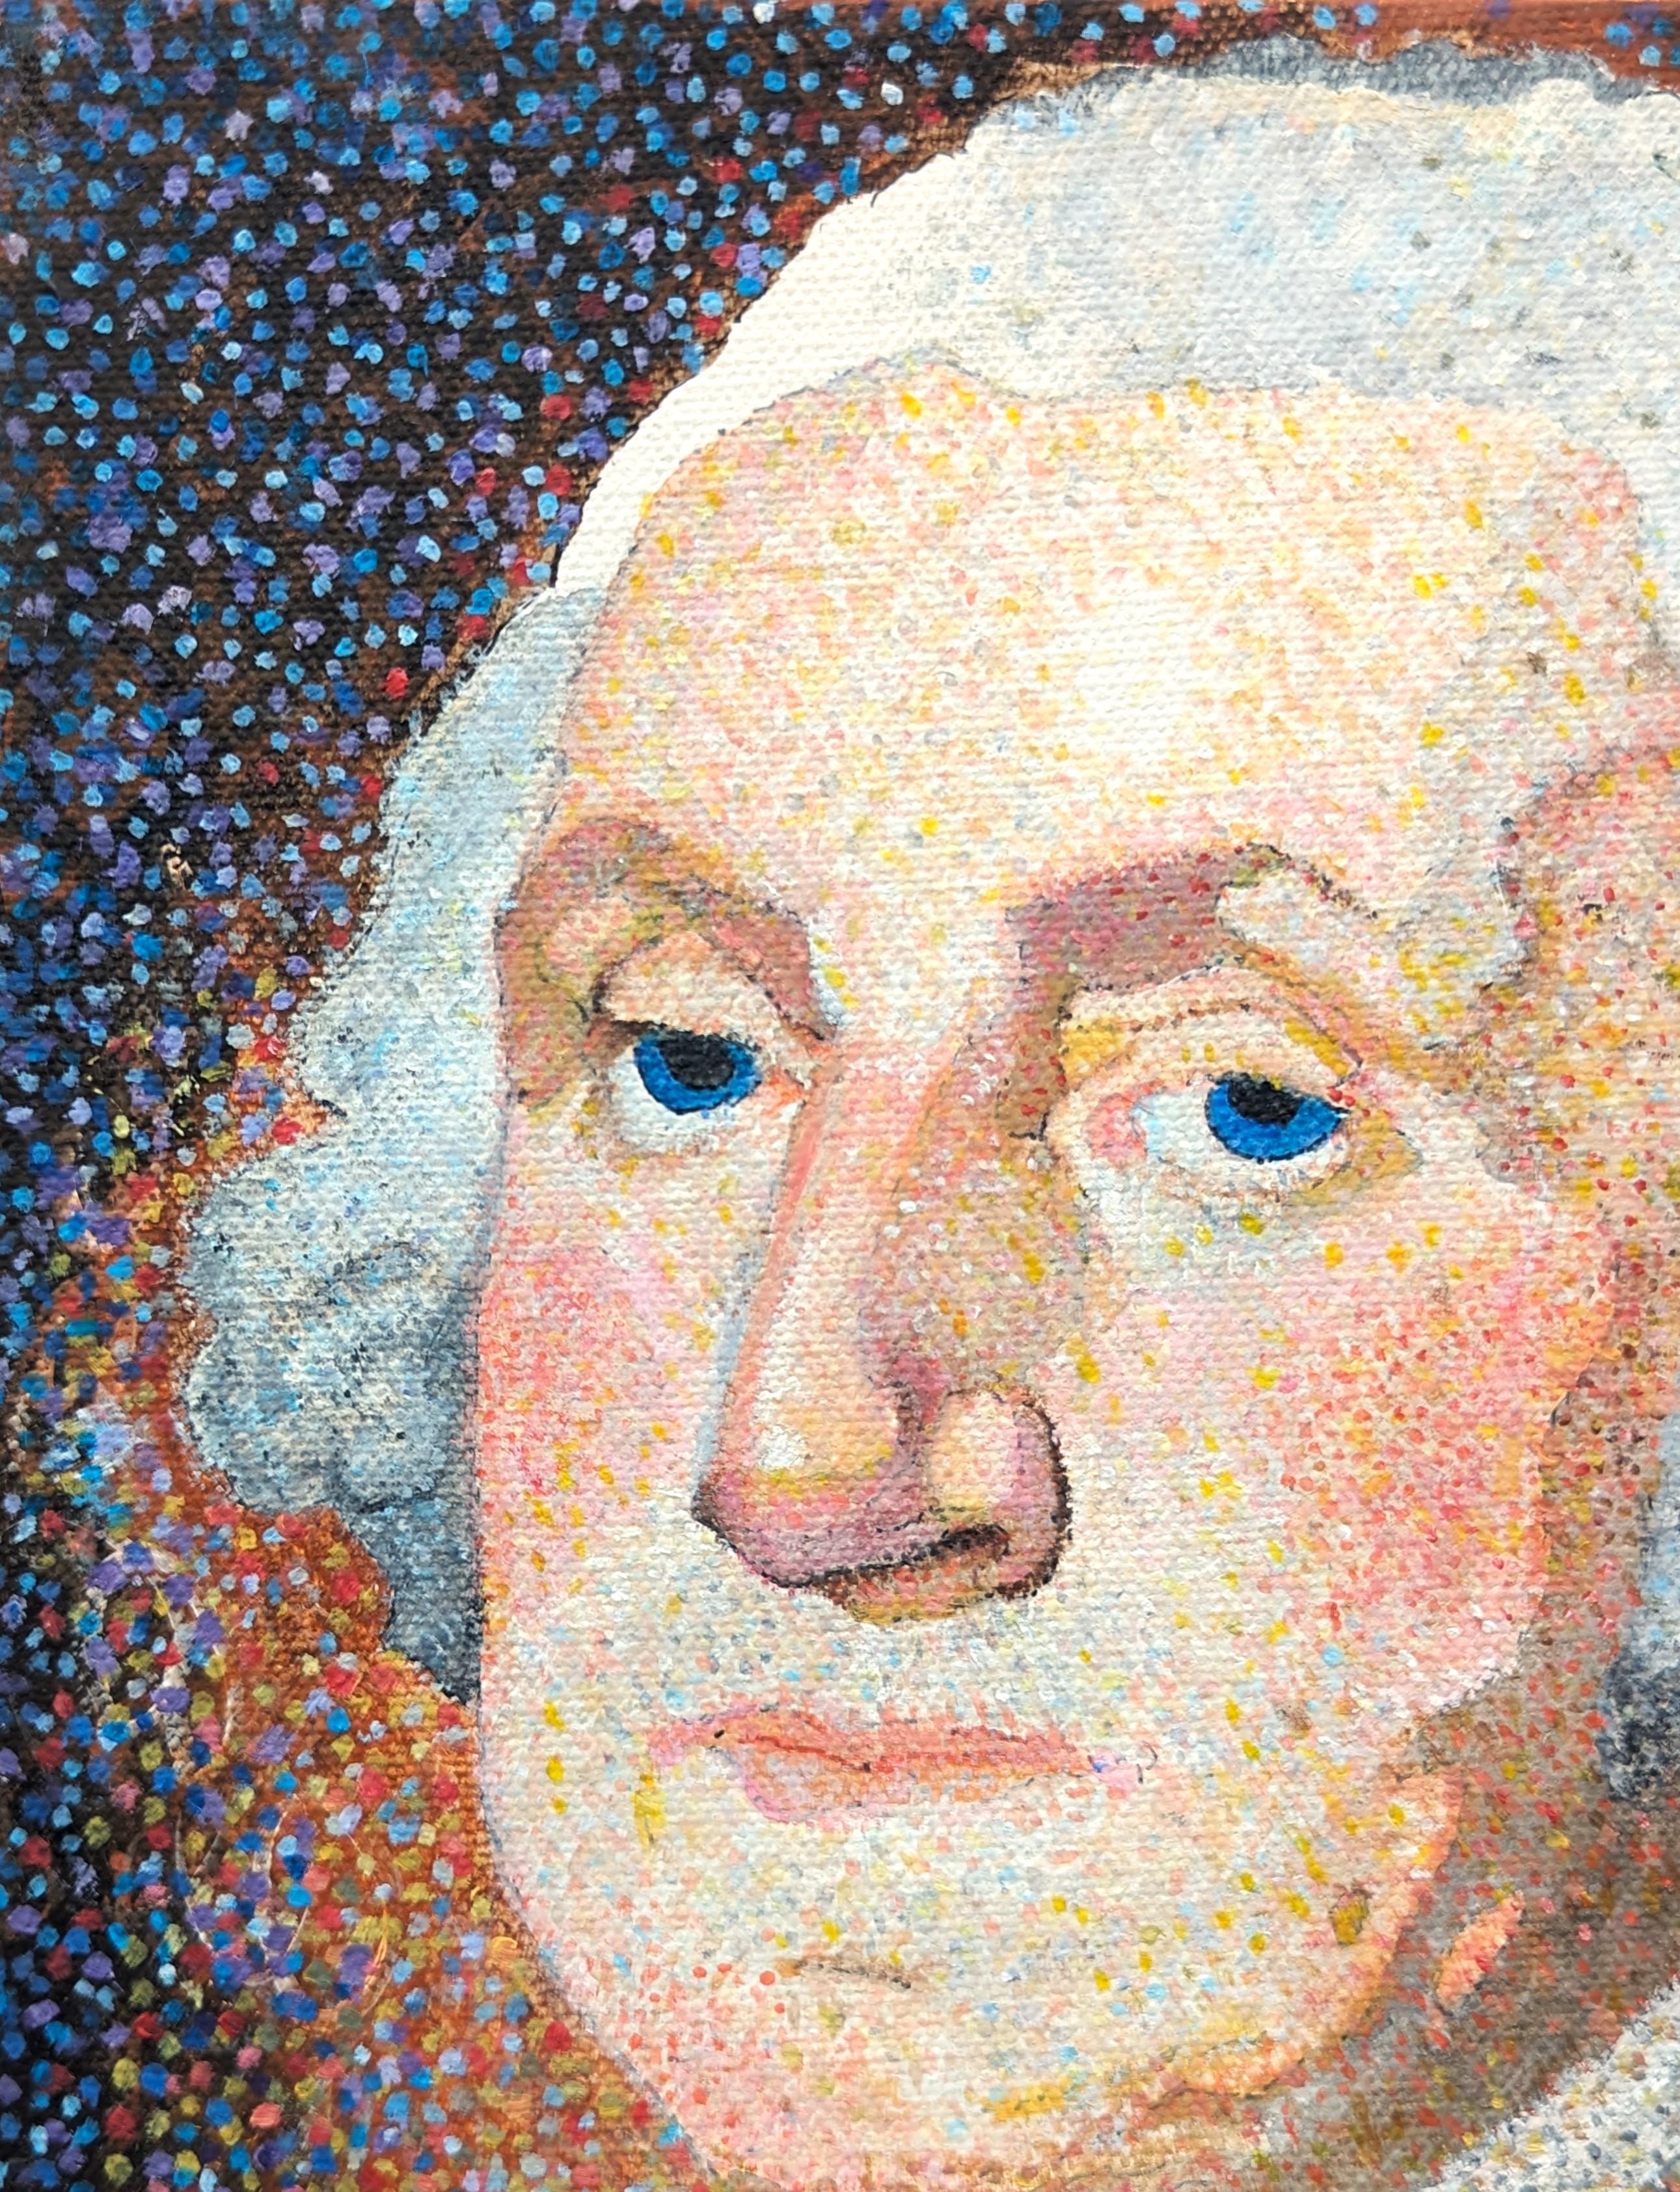 Modern portrait of George Washington painted on September 11th, 2001 by Texas born artist Clark Fox. The work features an intricate depiction of the former president using pointillism, the practice of applying small strokes or dots of color to a